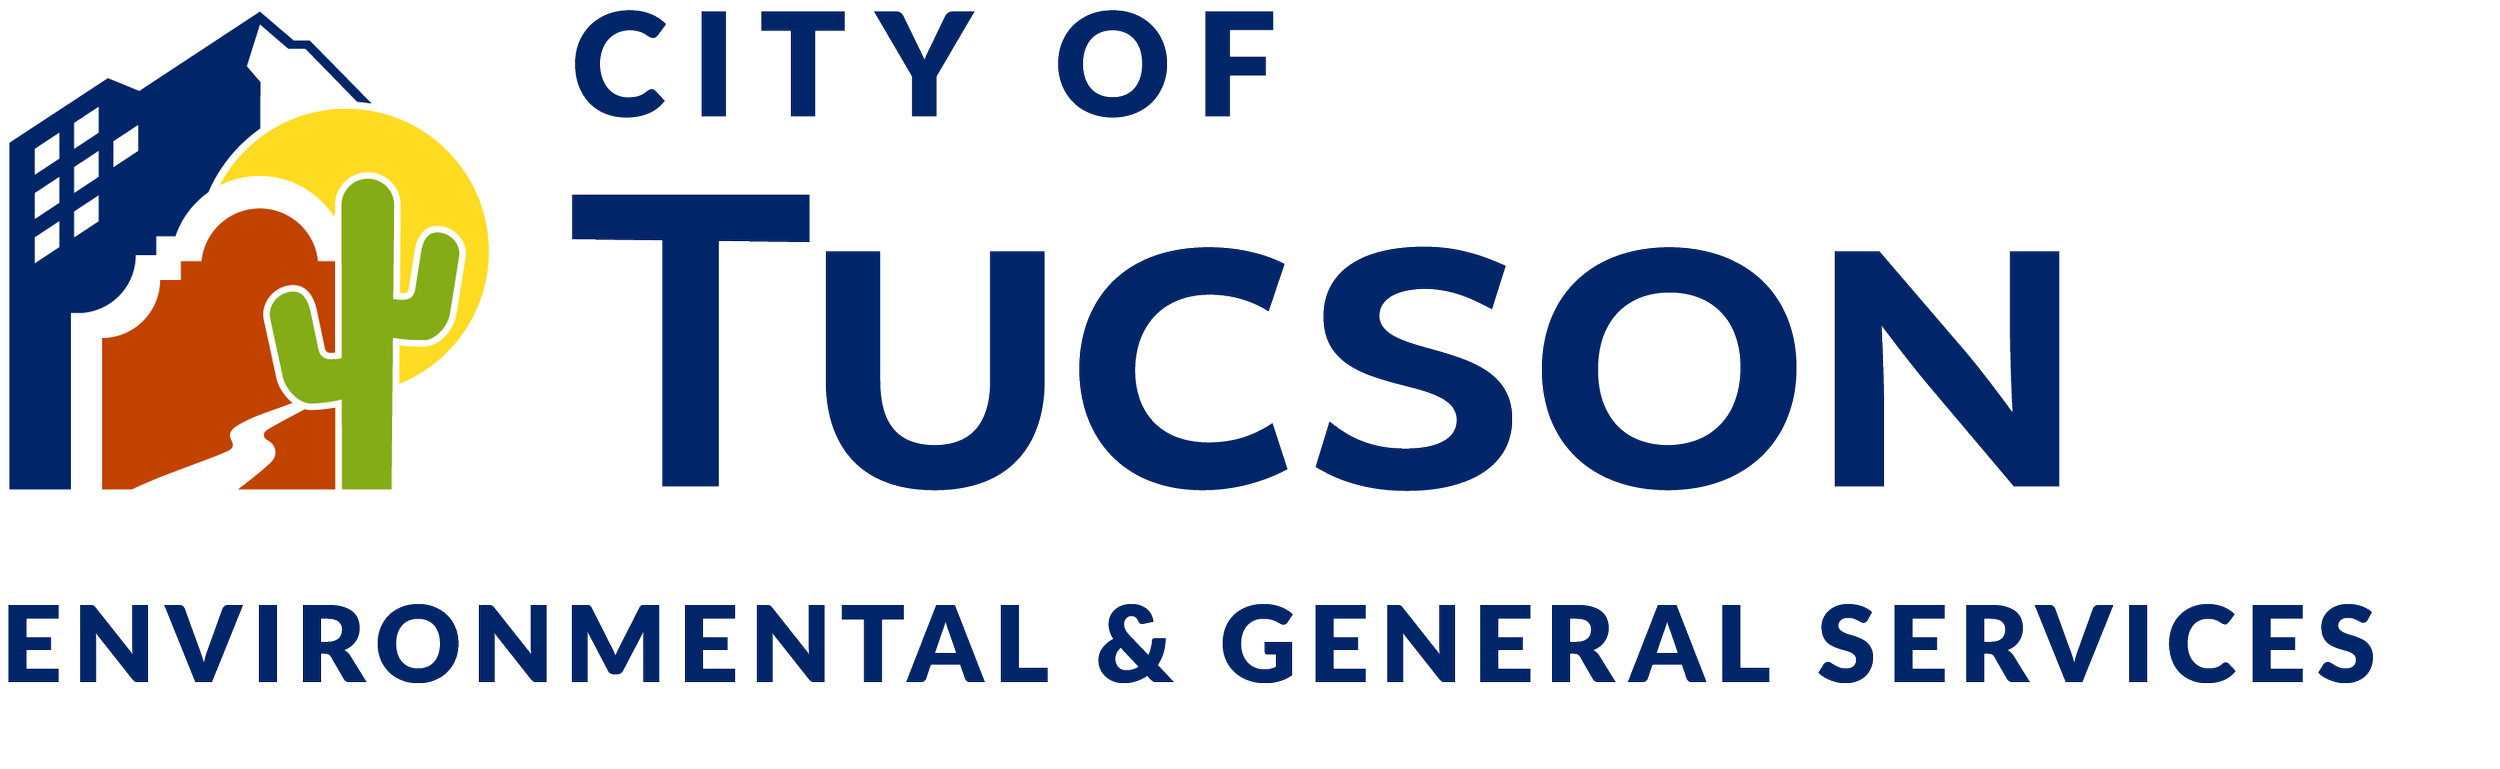 City-of-Tucson_Environmental-Services-horizontal.png